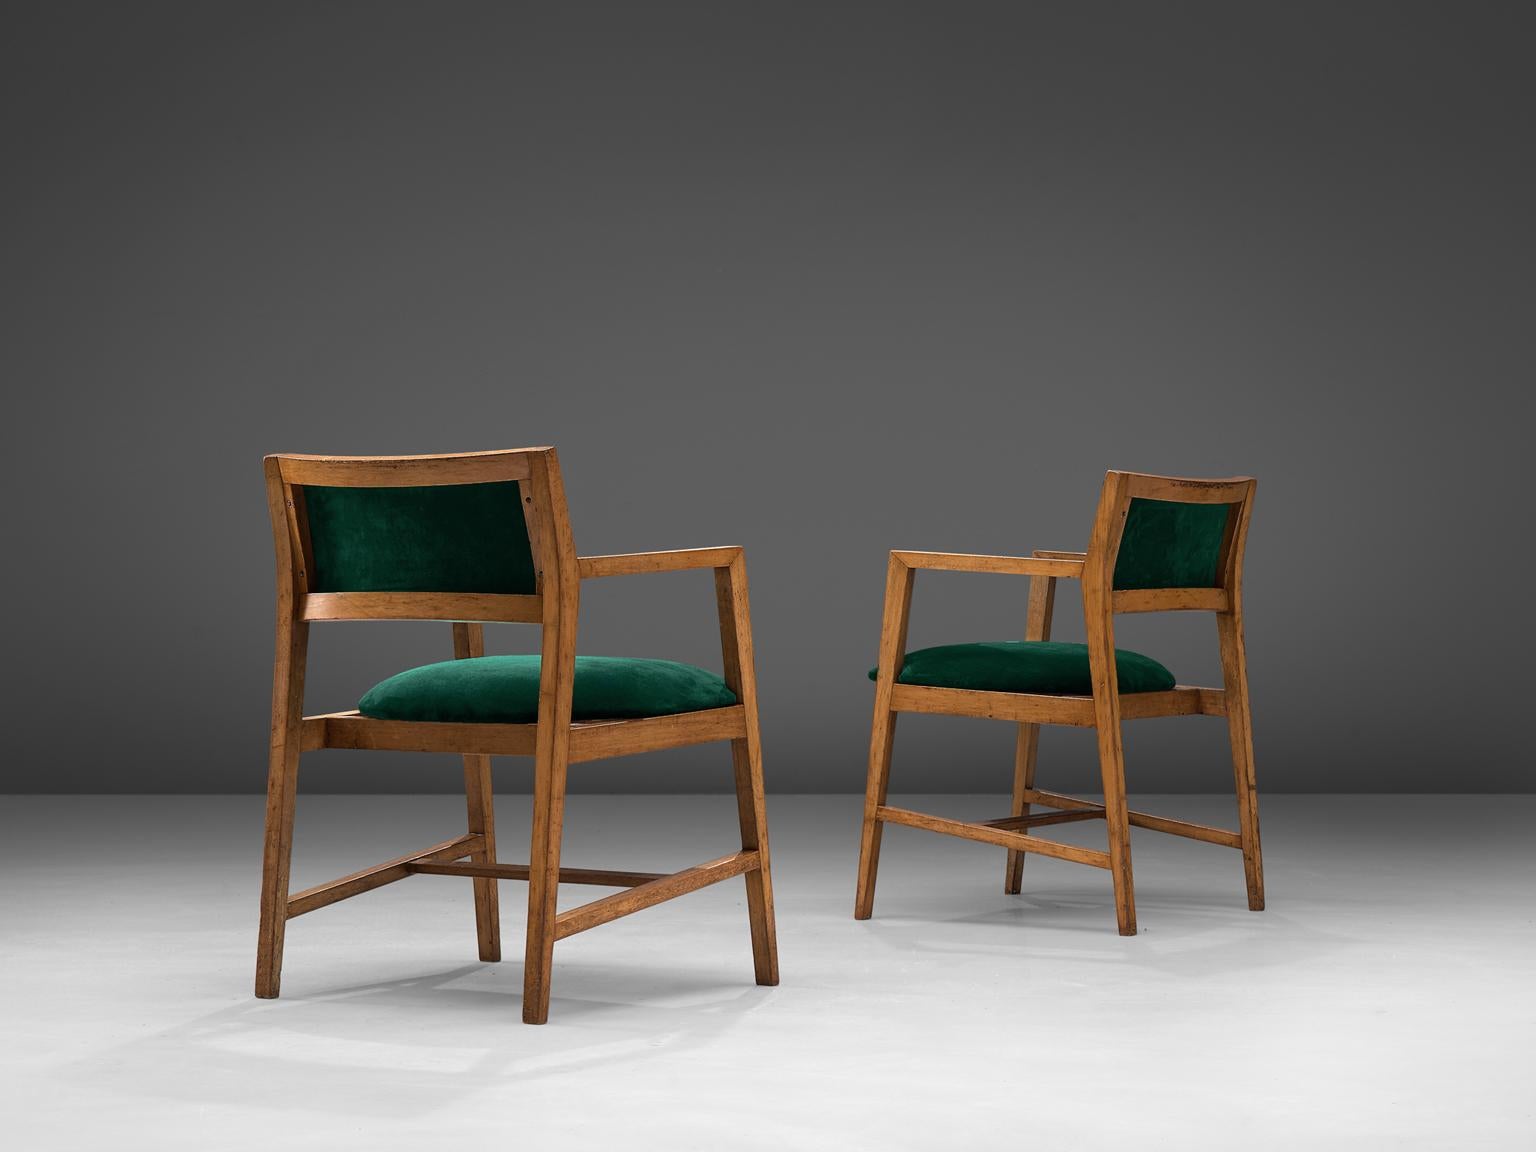 Edward Wormley for Dunbar, set of 2 armchairs, beech and velvet, United States, 1960s

This pair of Mid-Century Modern armchair were designed by Edward Wormley for Dunbar. This stunning pair of chairs have solid beech frames with geometric, modern